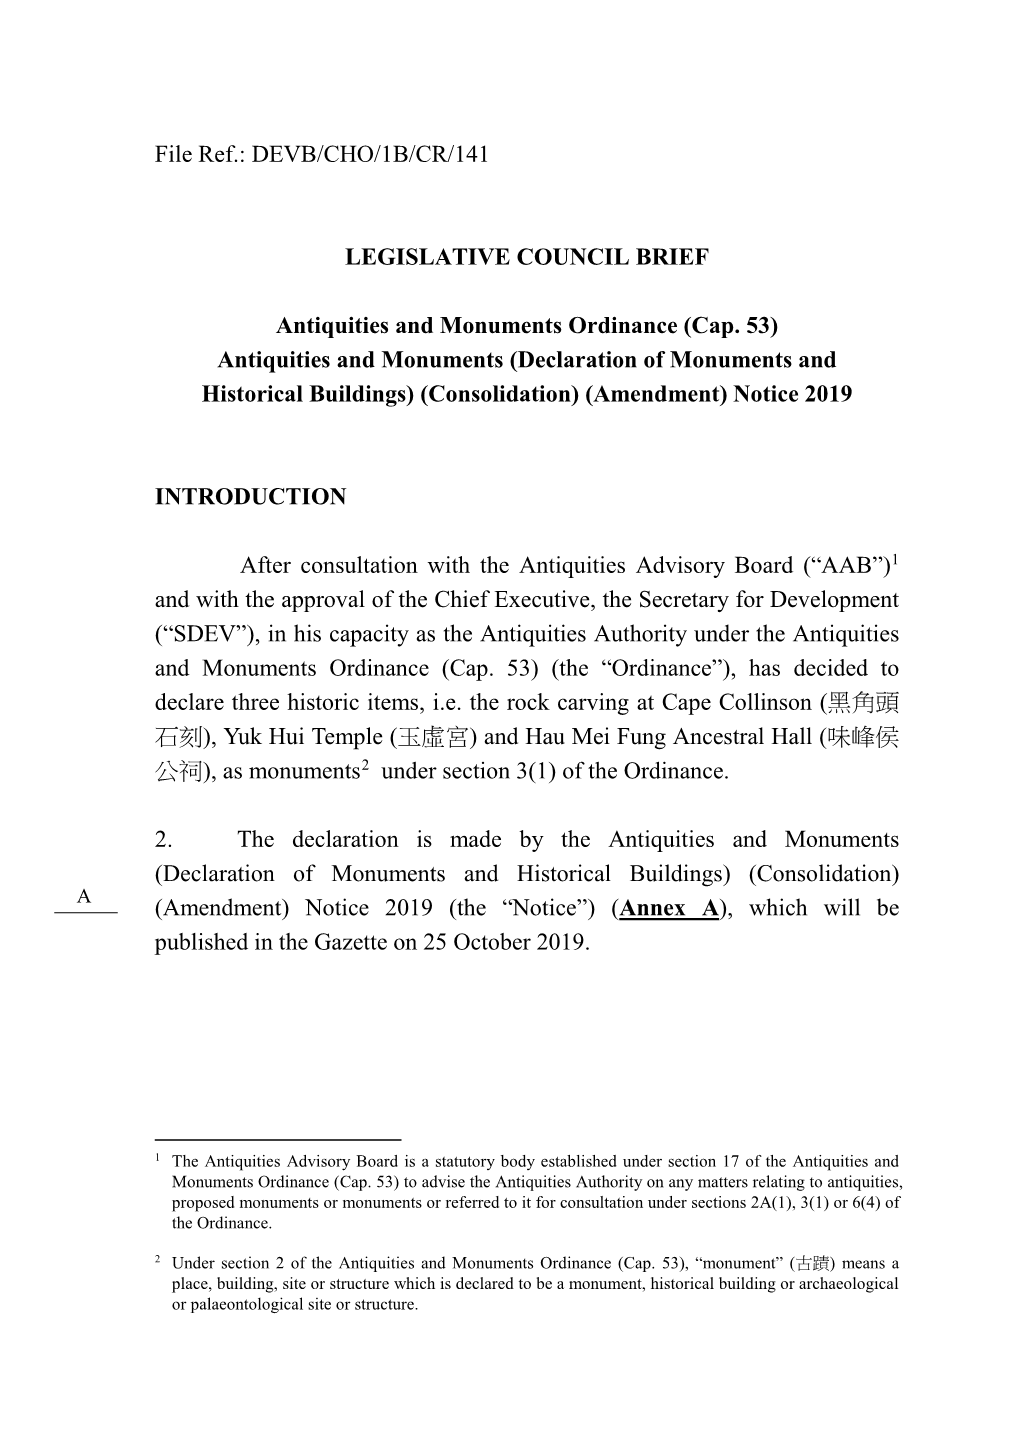 Antiquities and Monuments Ordinance (Cap. 53) Antiquities and Monuments (Declaration of Monuments and Historical Buildings) (Consolidation) (Amendment) Notice 2019